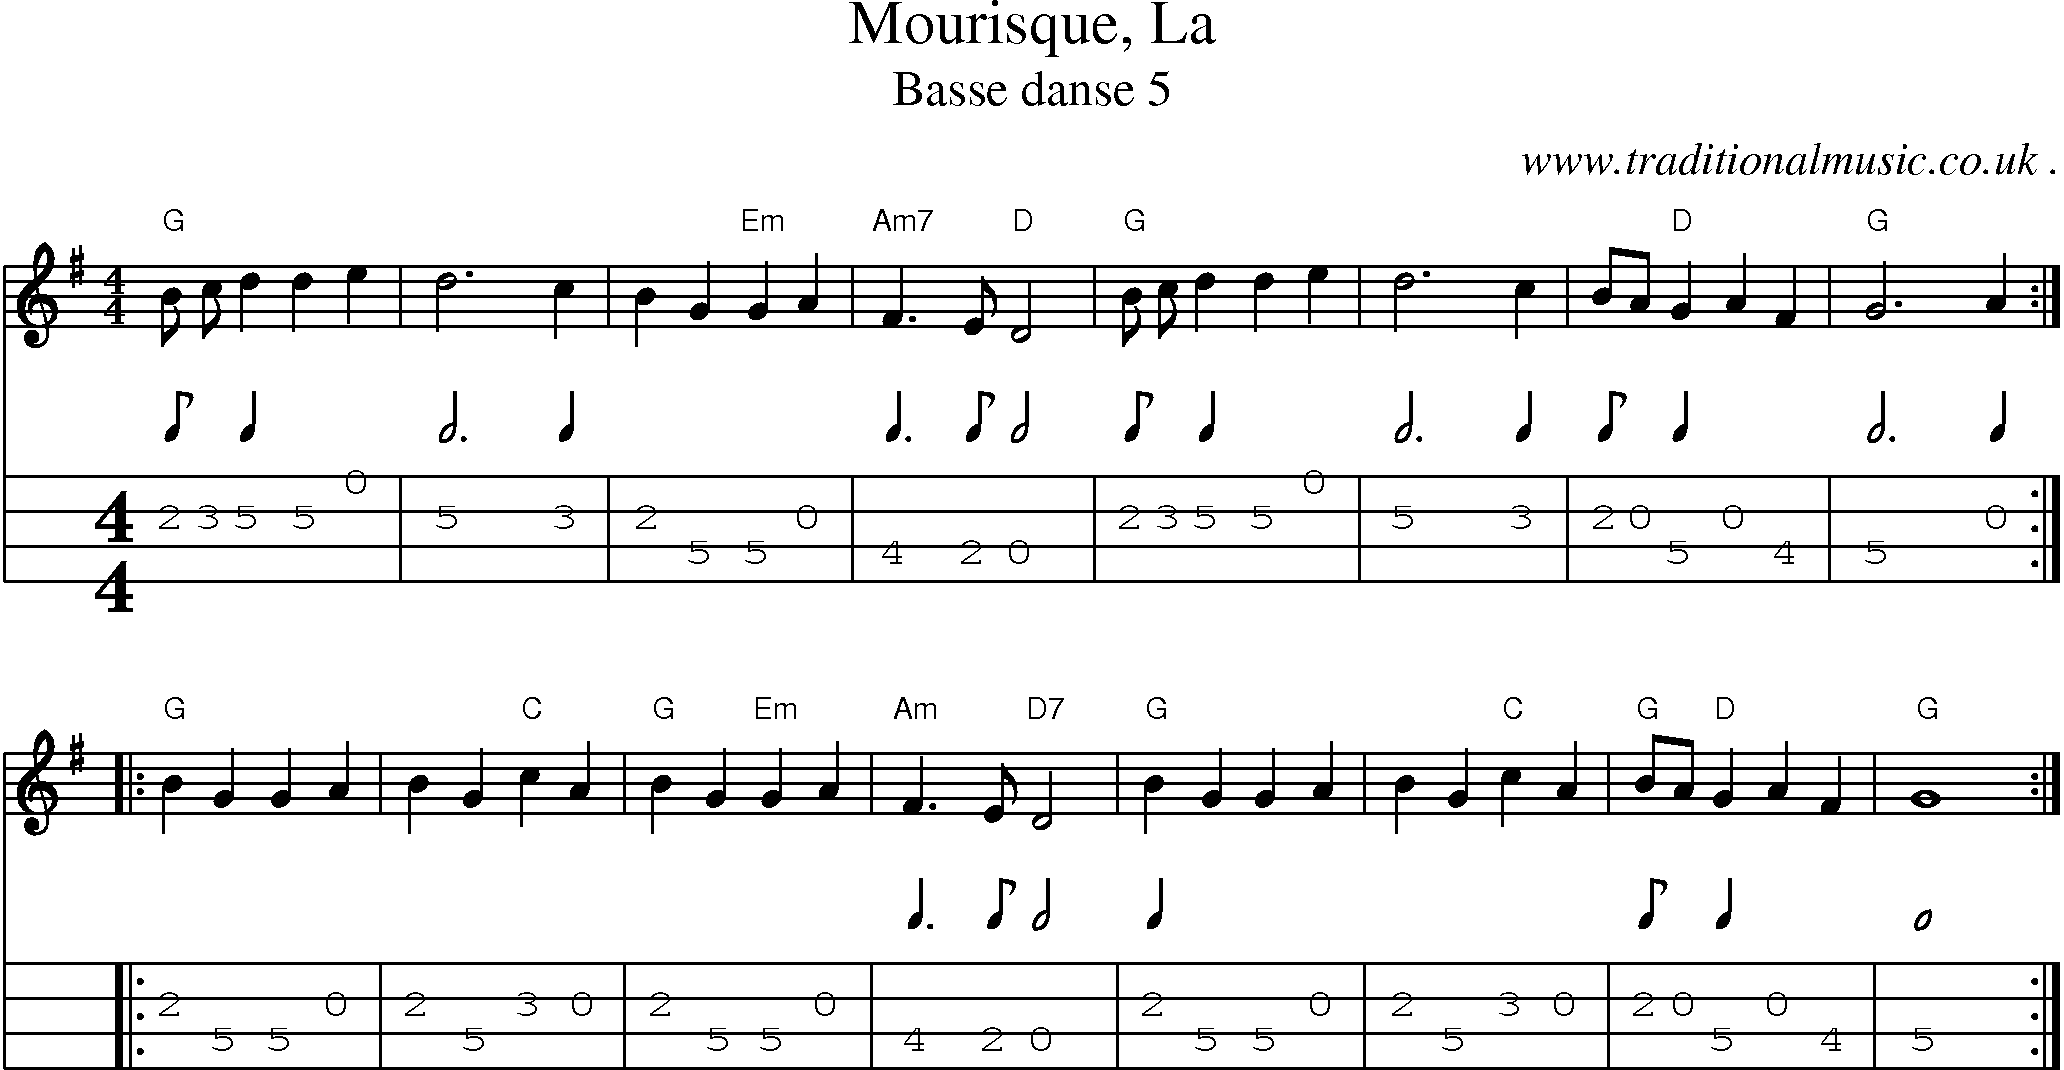 Music Score and Guitar Tabs for Mourisque La